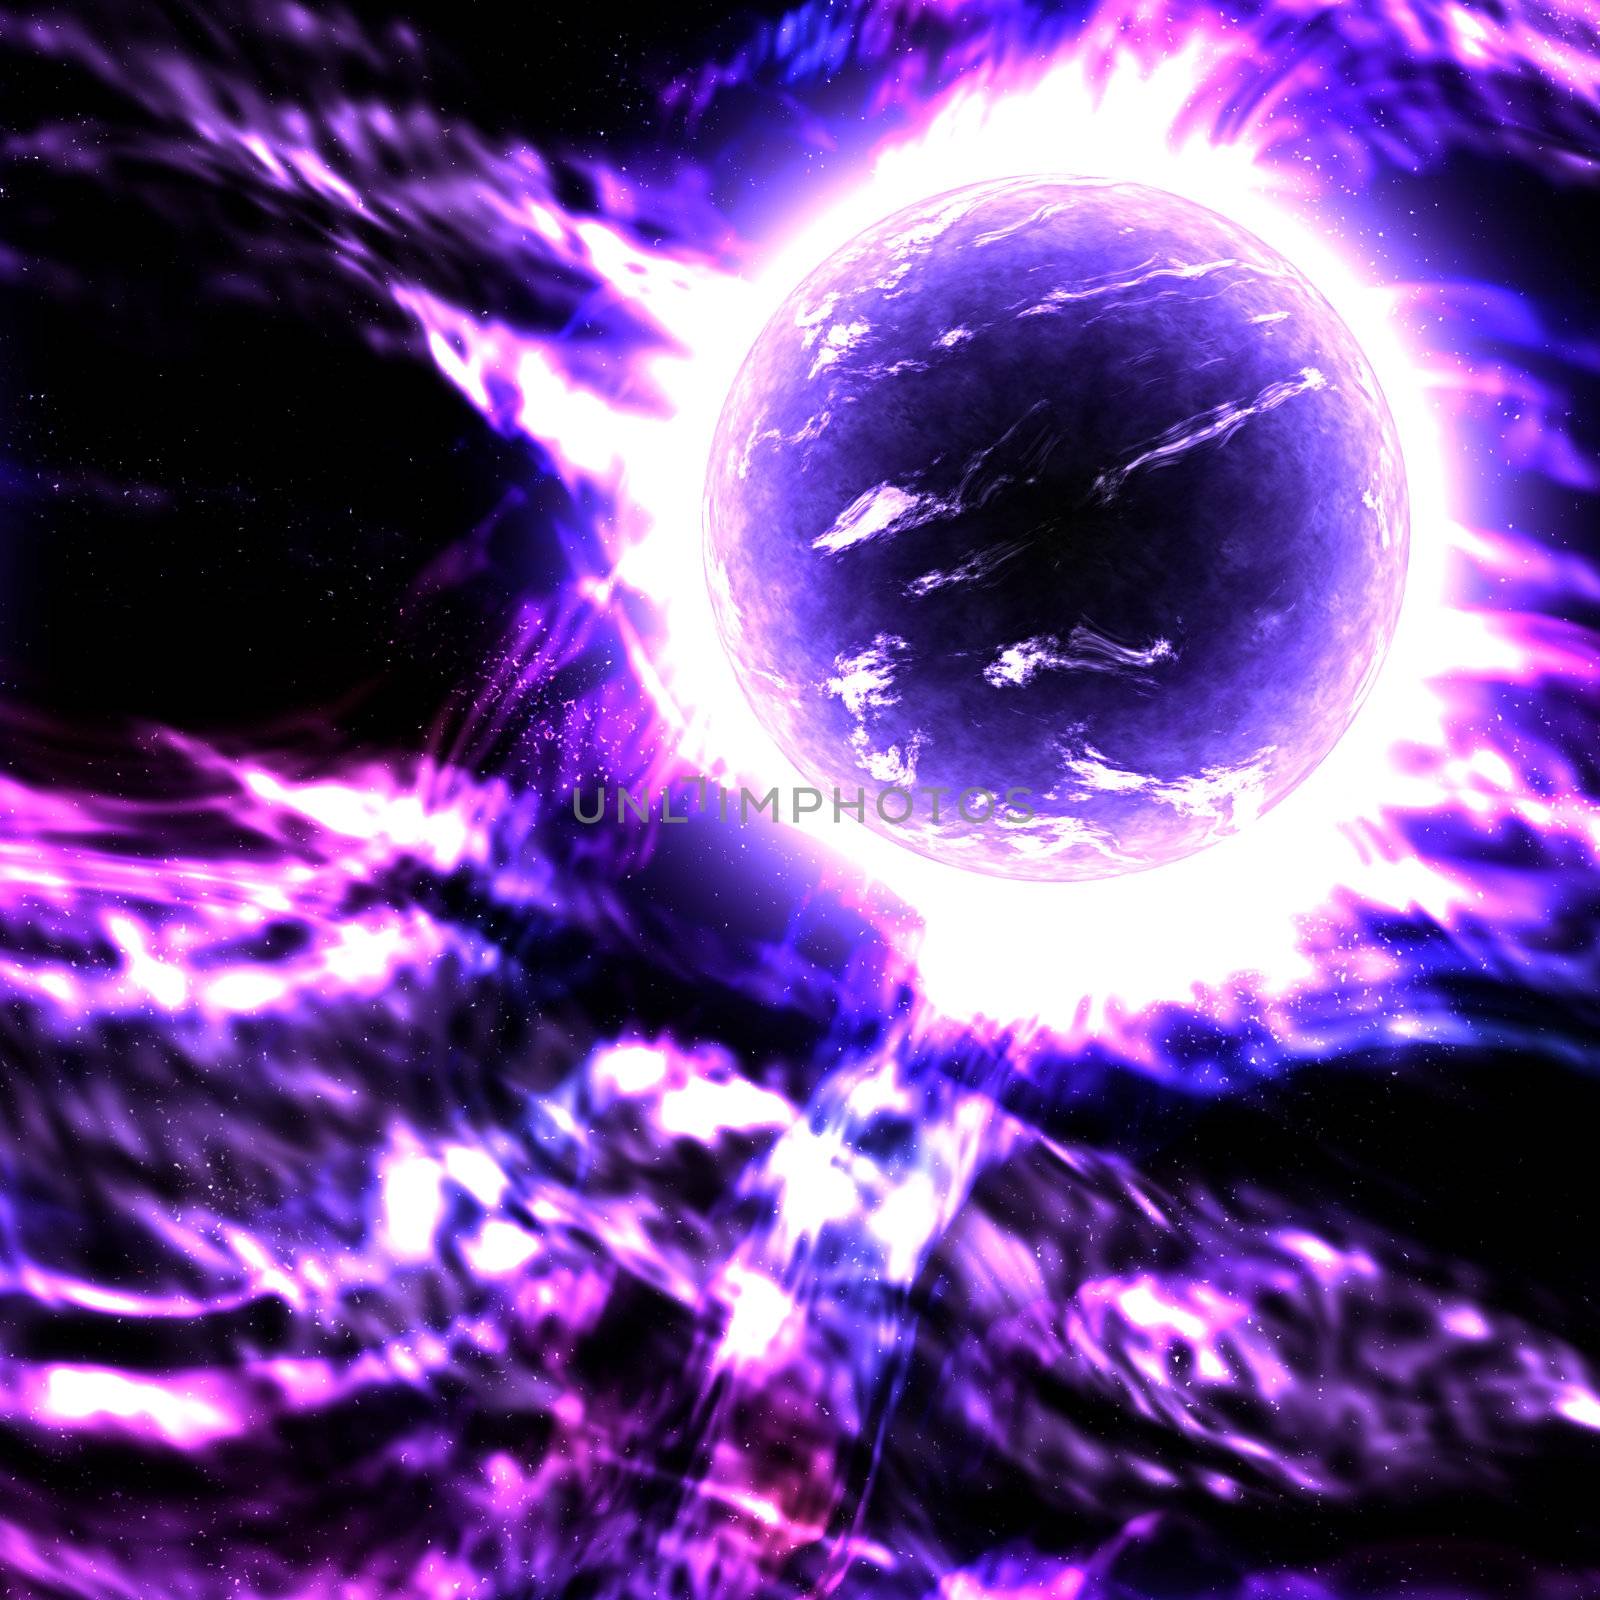 Artistic render of planet in space